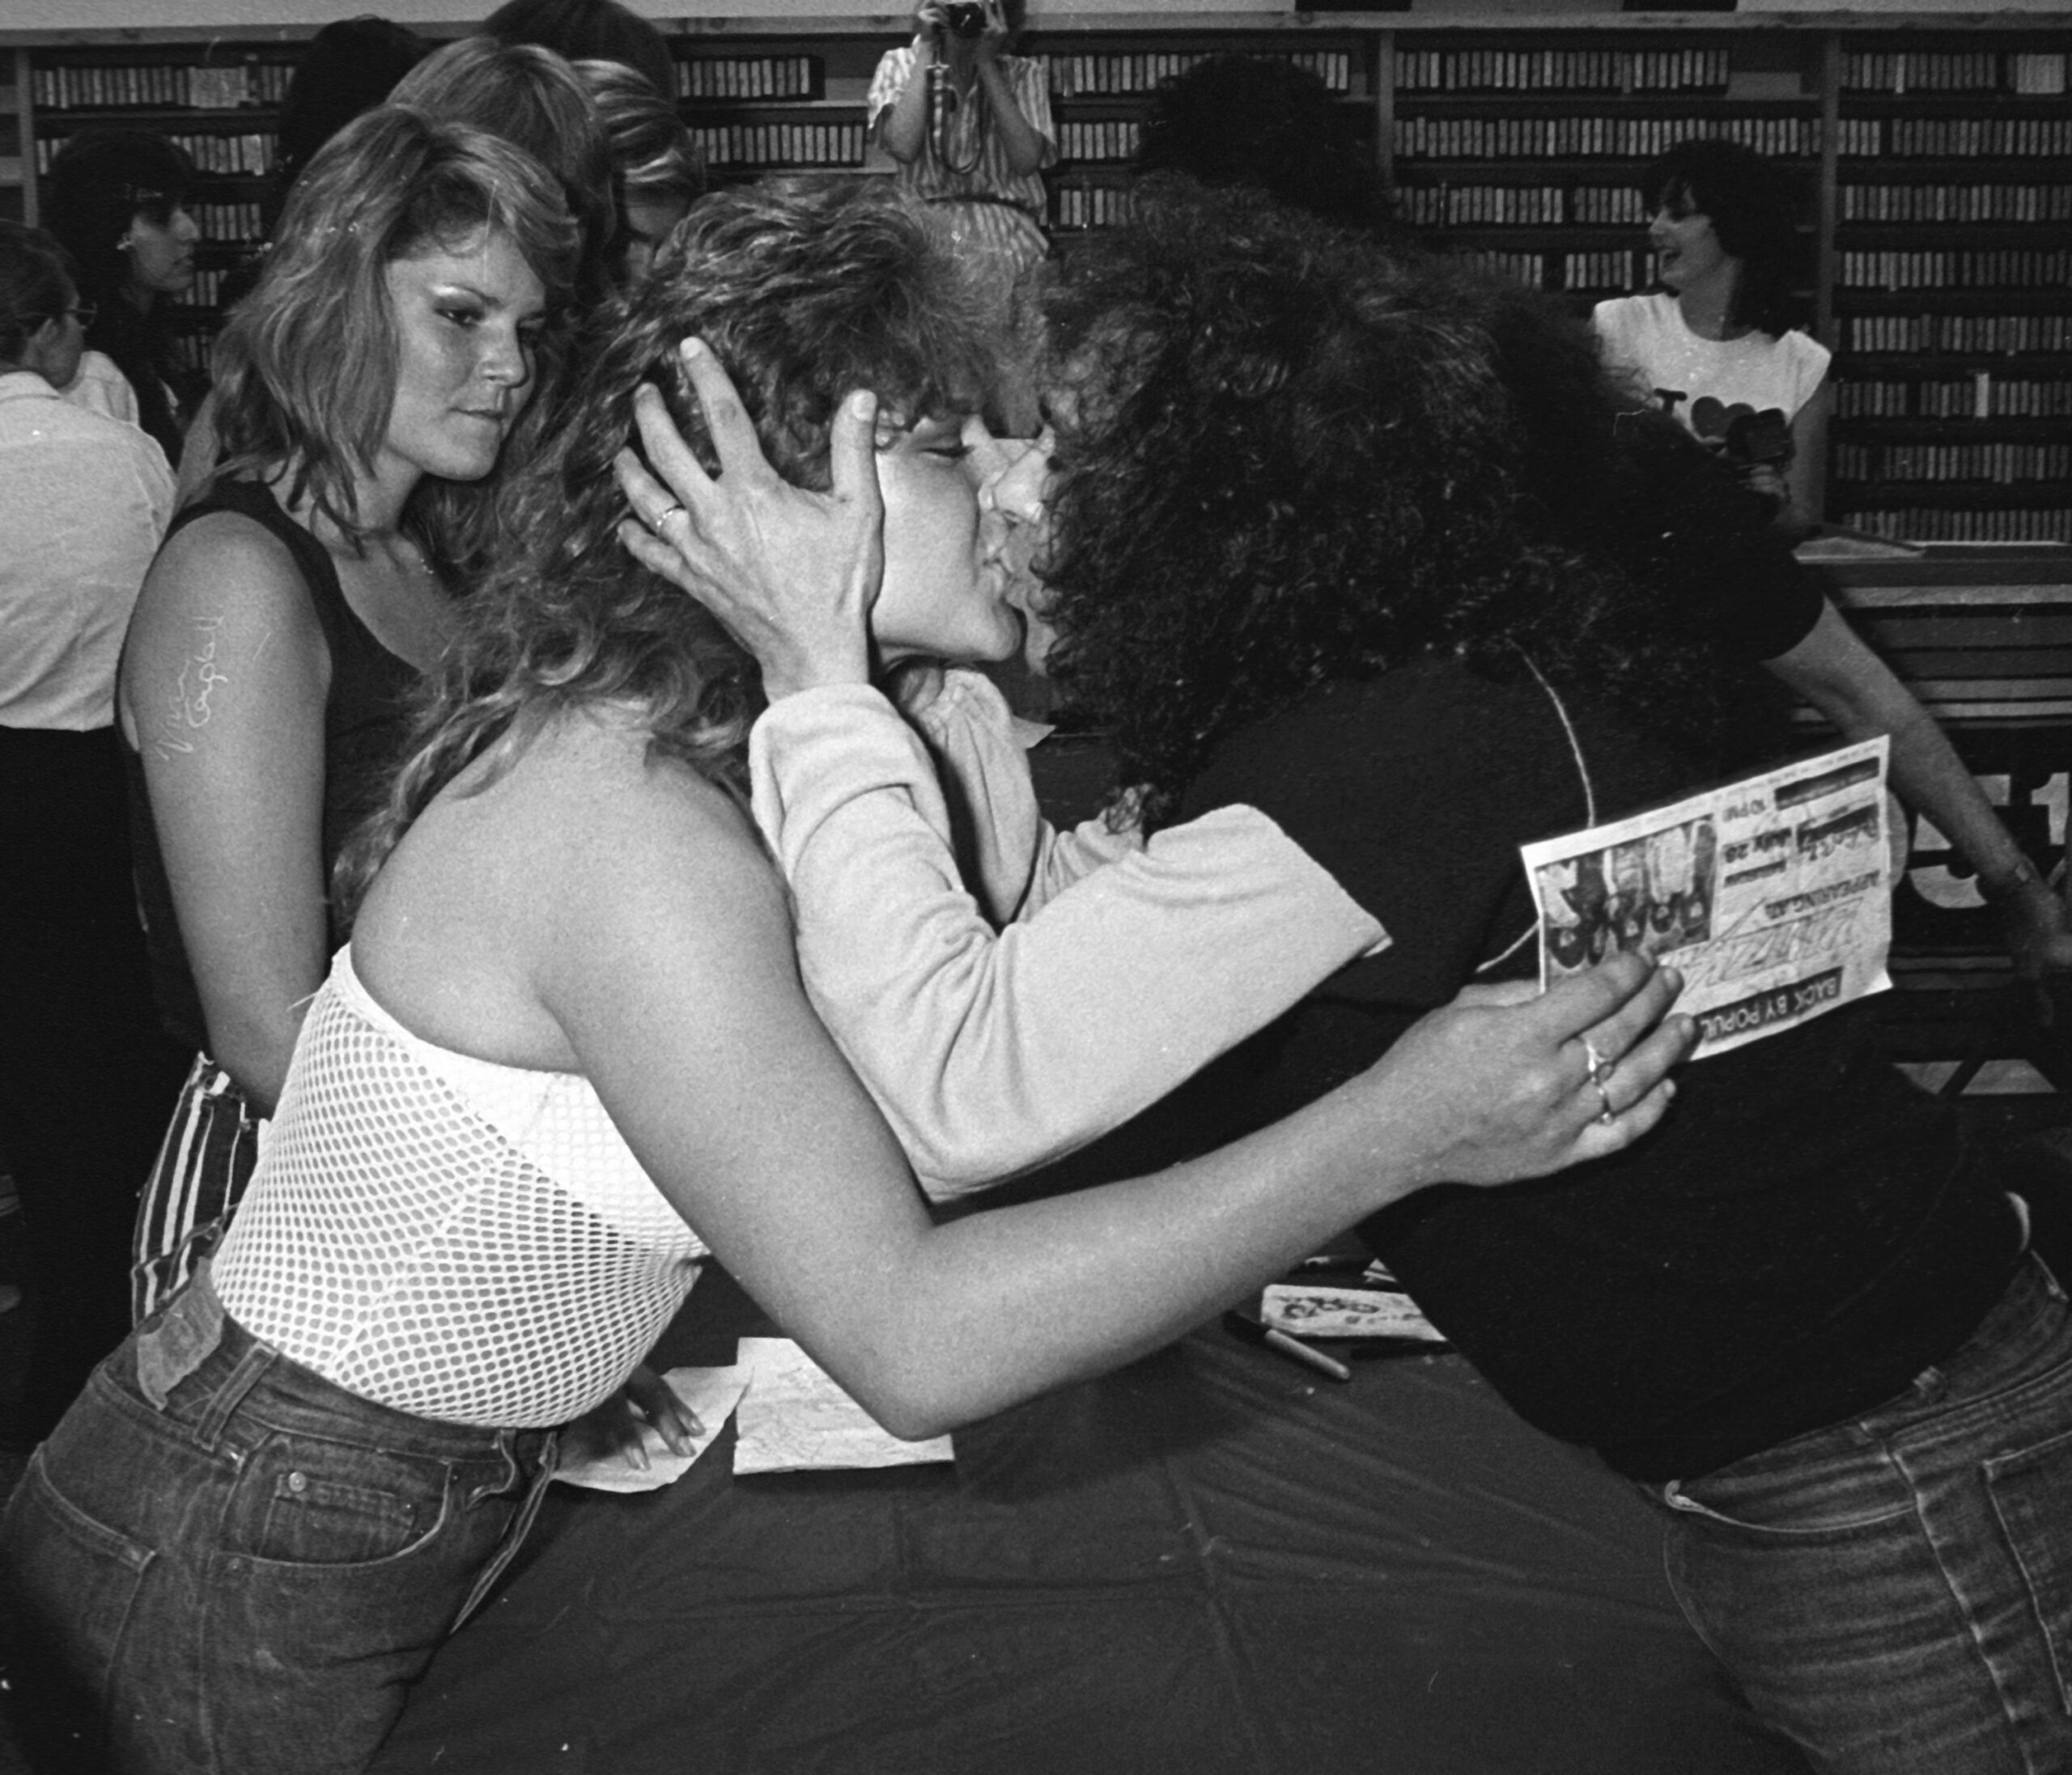 Musician Ronnie James Dio attends Ronnie James Dio Autograph Session on July 18, 1984 at Warehouse Records in Glendora, California. (Photo by Ron Galella, Ltd./Ron Galella Collection via Getty Images)